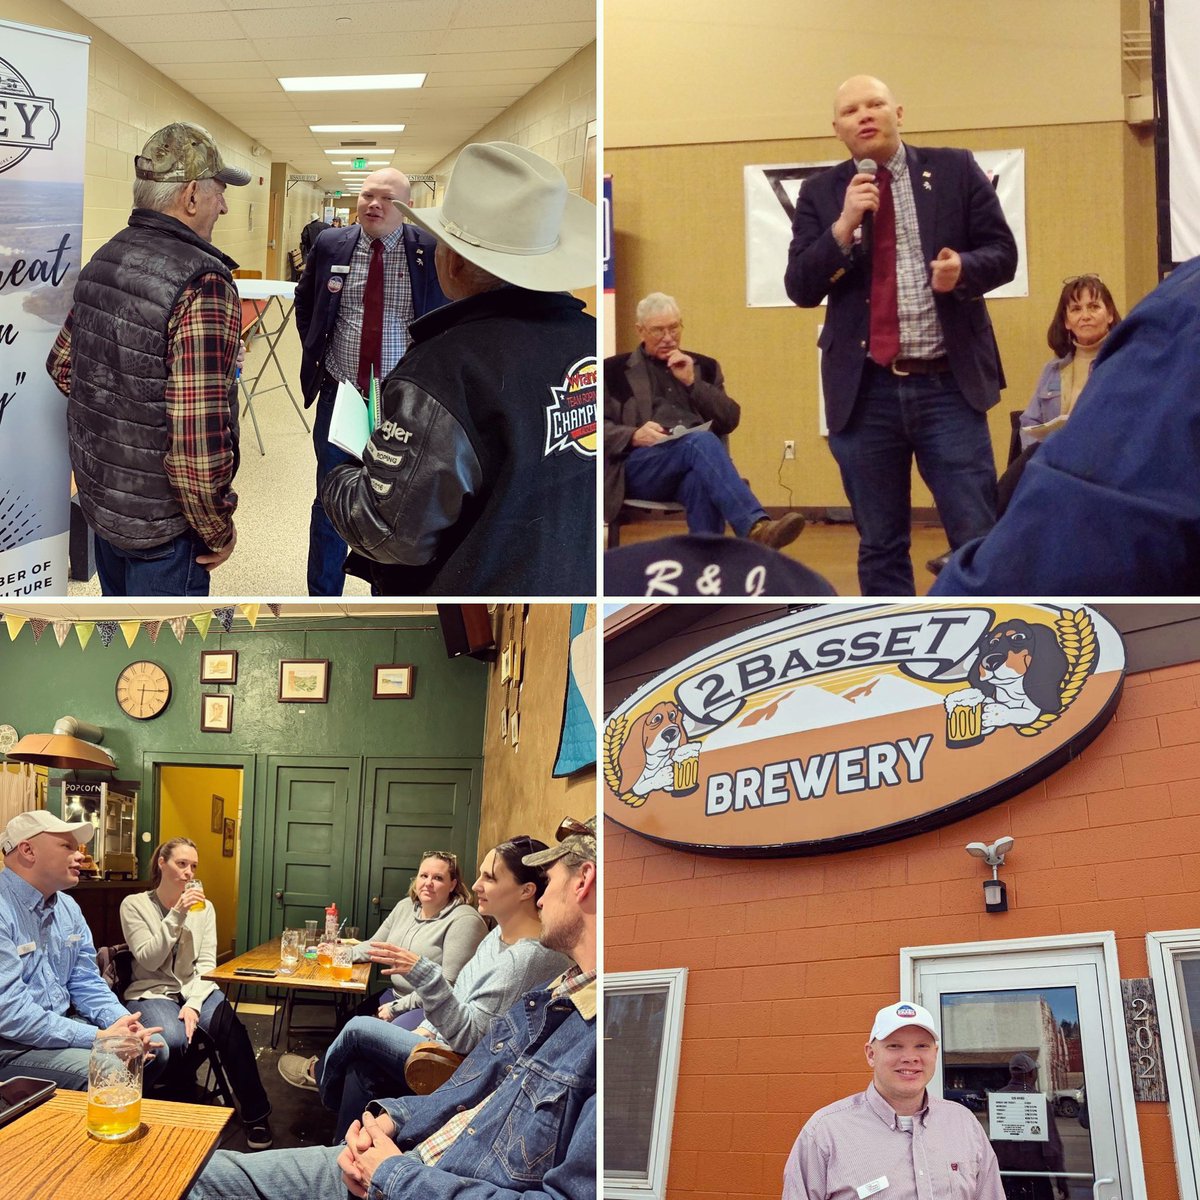 A good week of talking with people on the campaign trail, with stops in #Sidney at the #MonDakAgDays and #crushchaos brewery tour stops in #MilesCity and #WhiteSulphurSprings! I’m working hard to bring a new generation of leadership to DC, focused on restoring stability! #mtpol